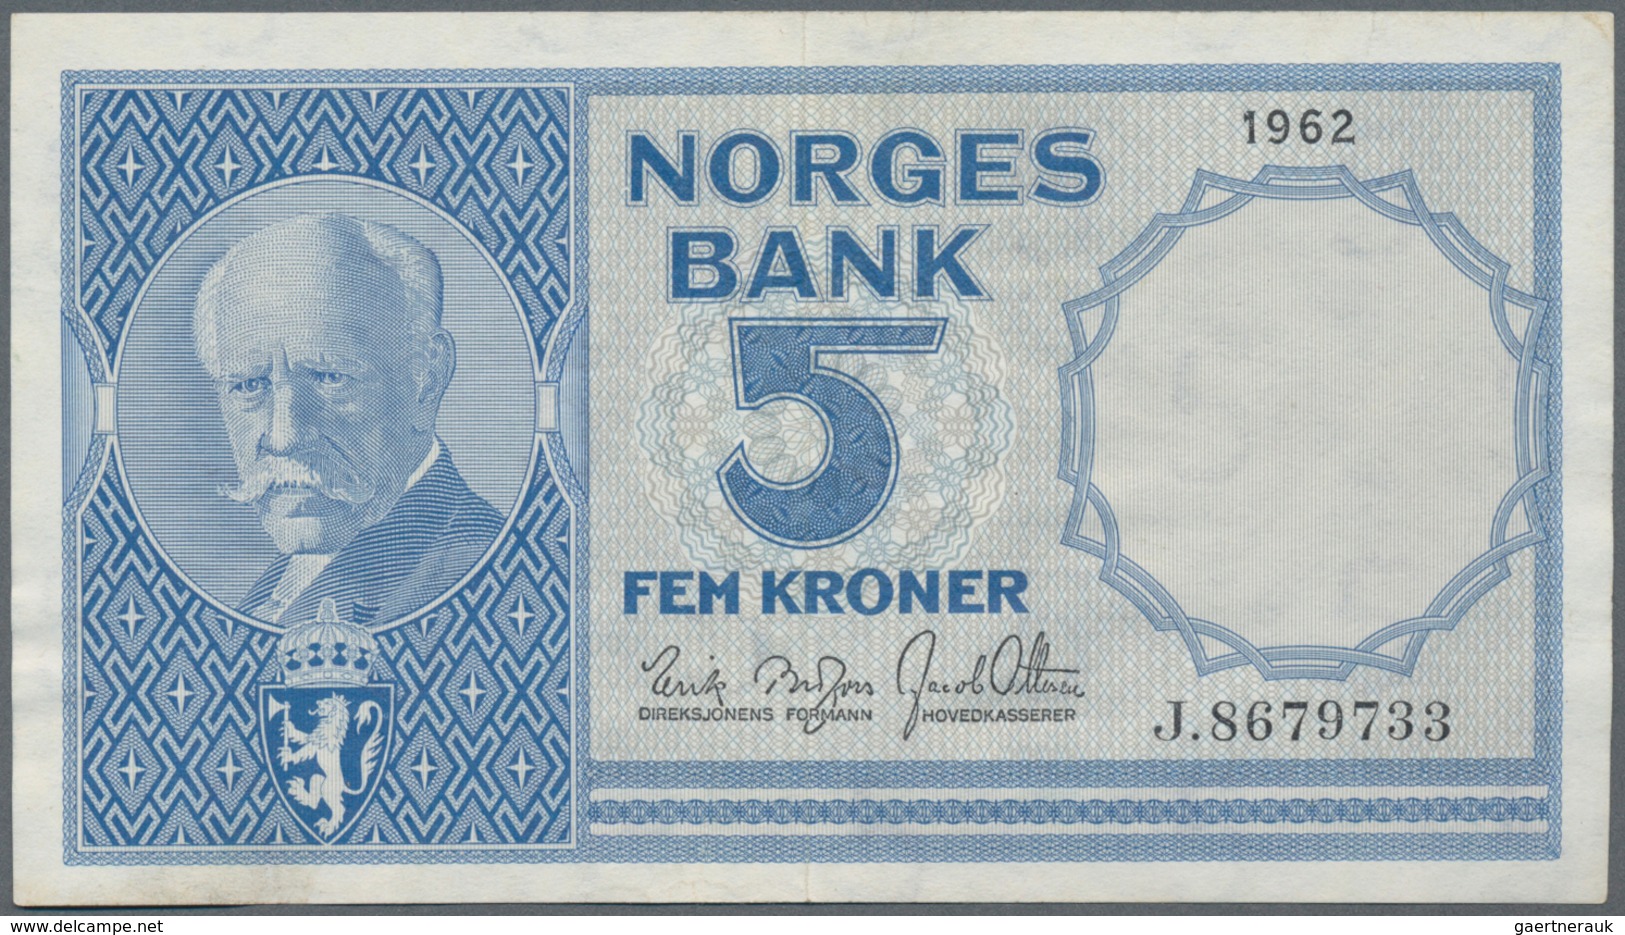 Alle Welt: Huge lot with 410 banknotes from all over the world, comprising amongst others Germany Fe